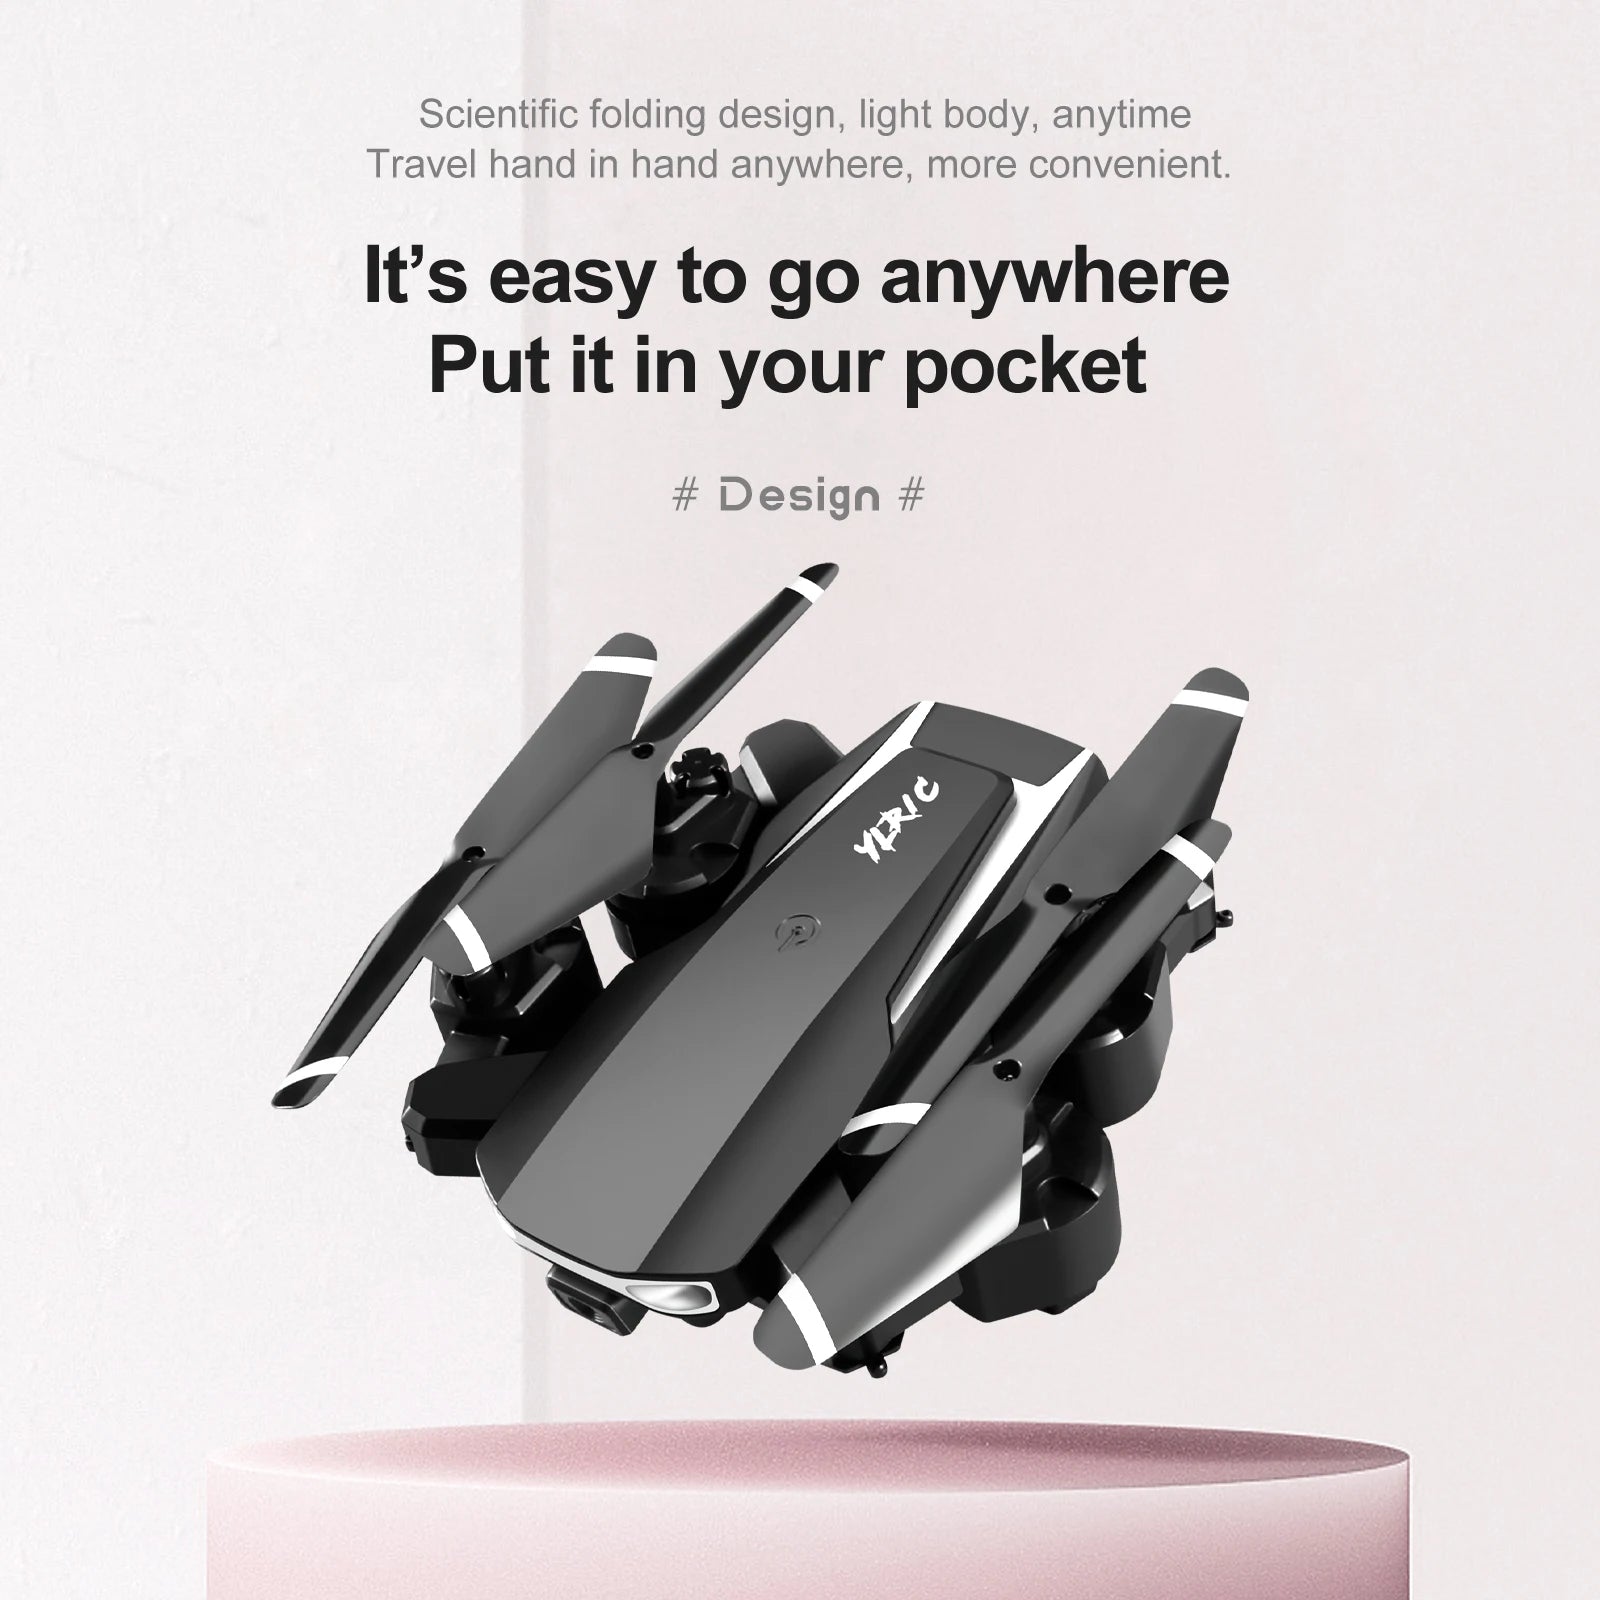 S90 Mini Drone, scientific folding design; light body, anytime travel hand in hand anywhere 